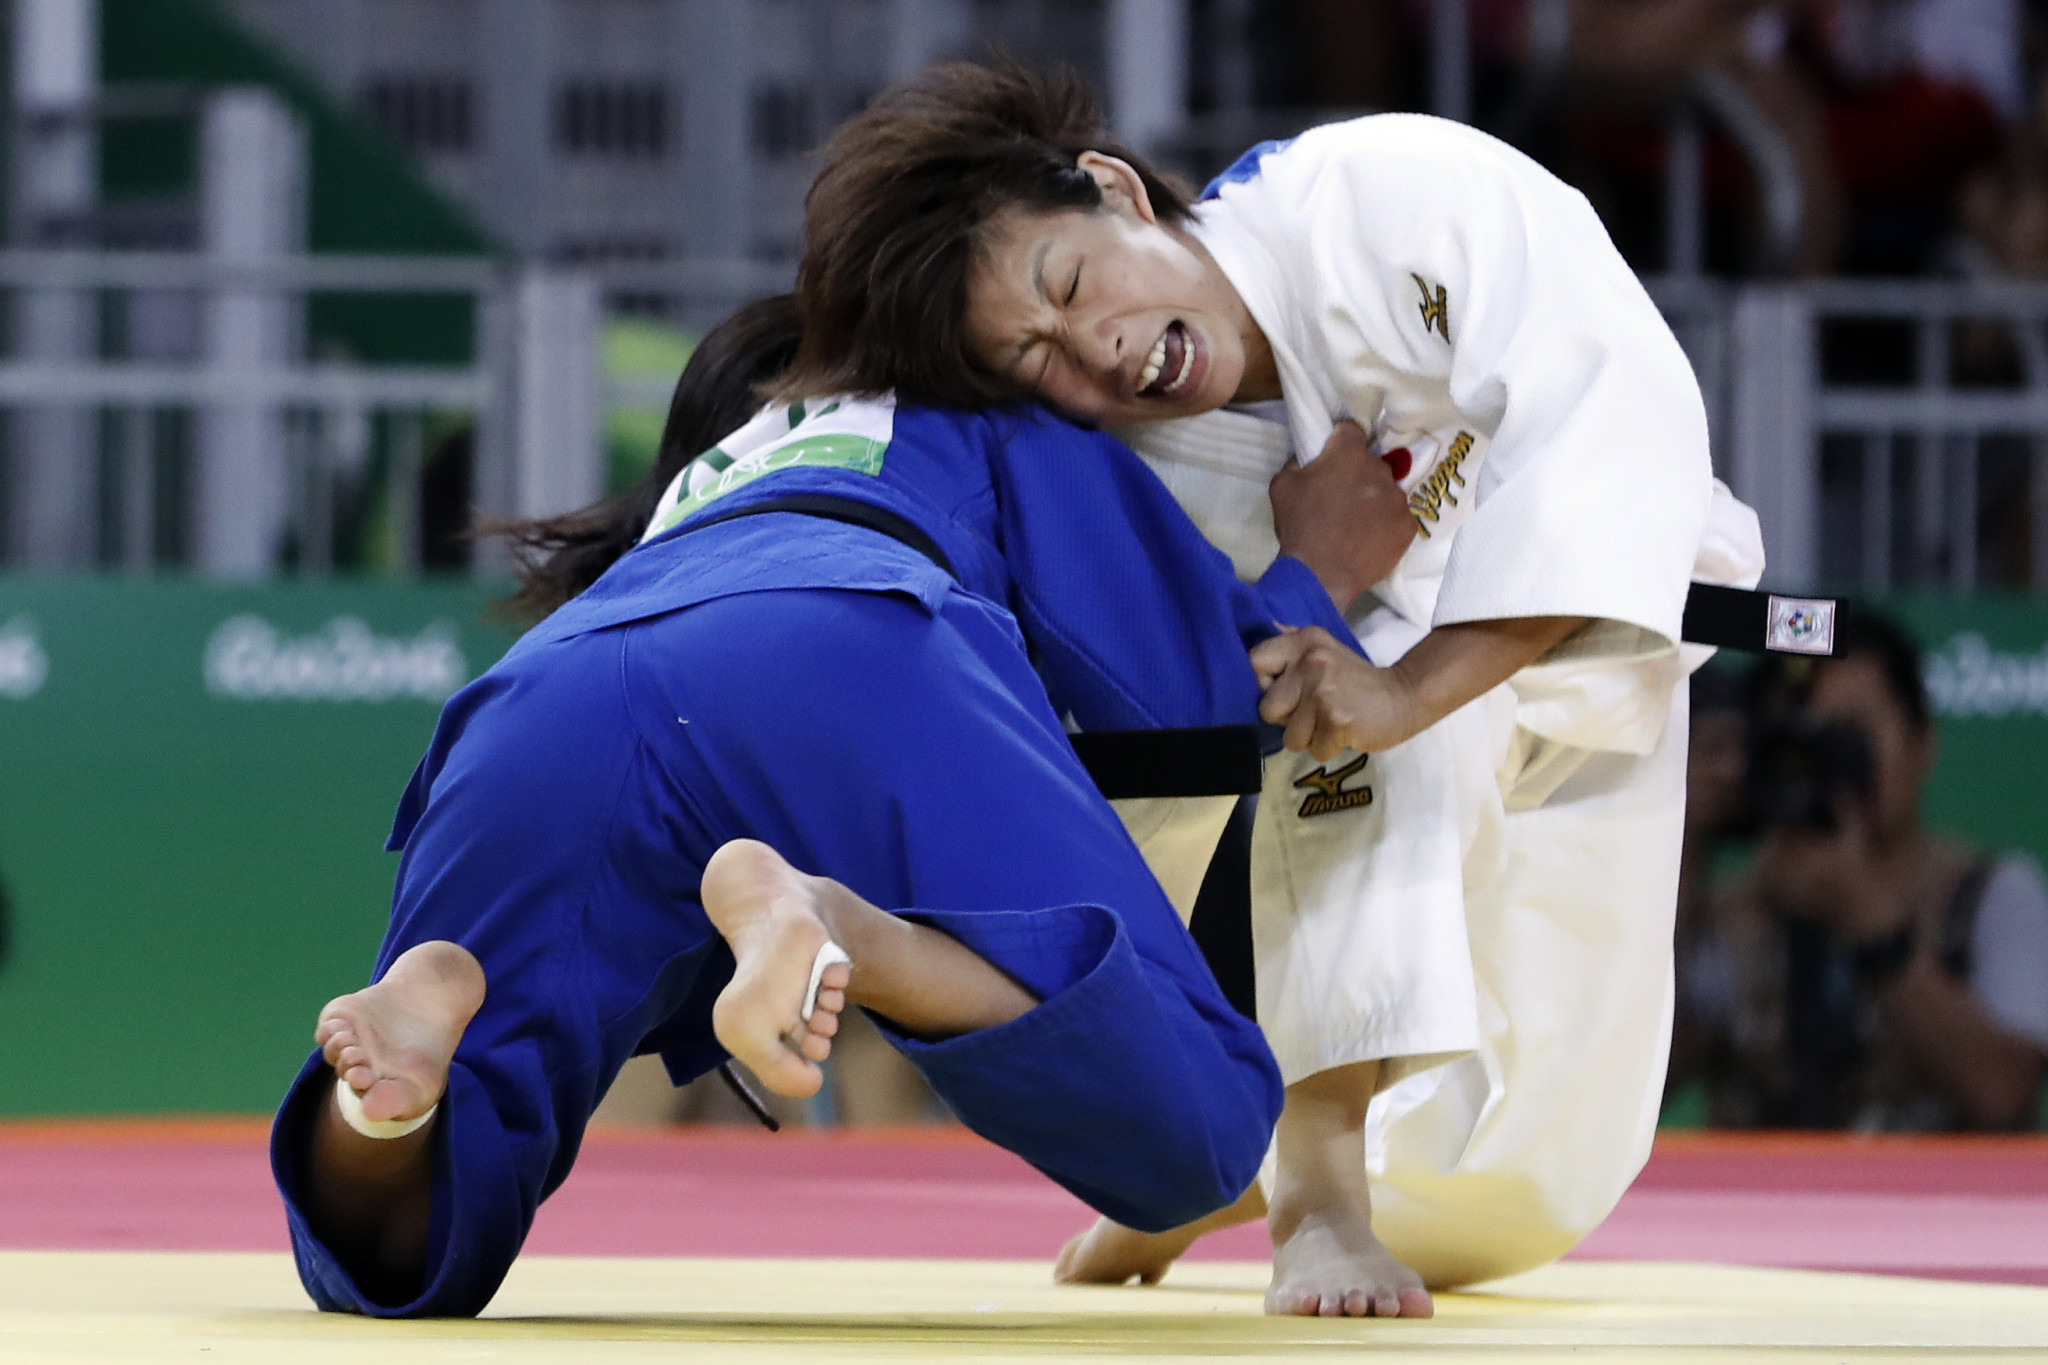 Ami Kondo won an Olympic bronze medal at Rio 2016 during a 20-year career that started at the age of five ©Getty Images